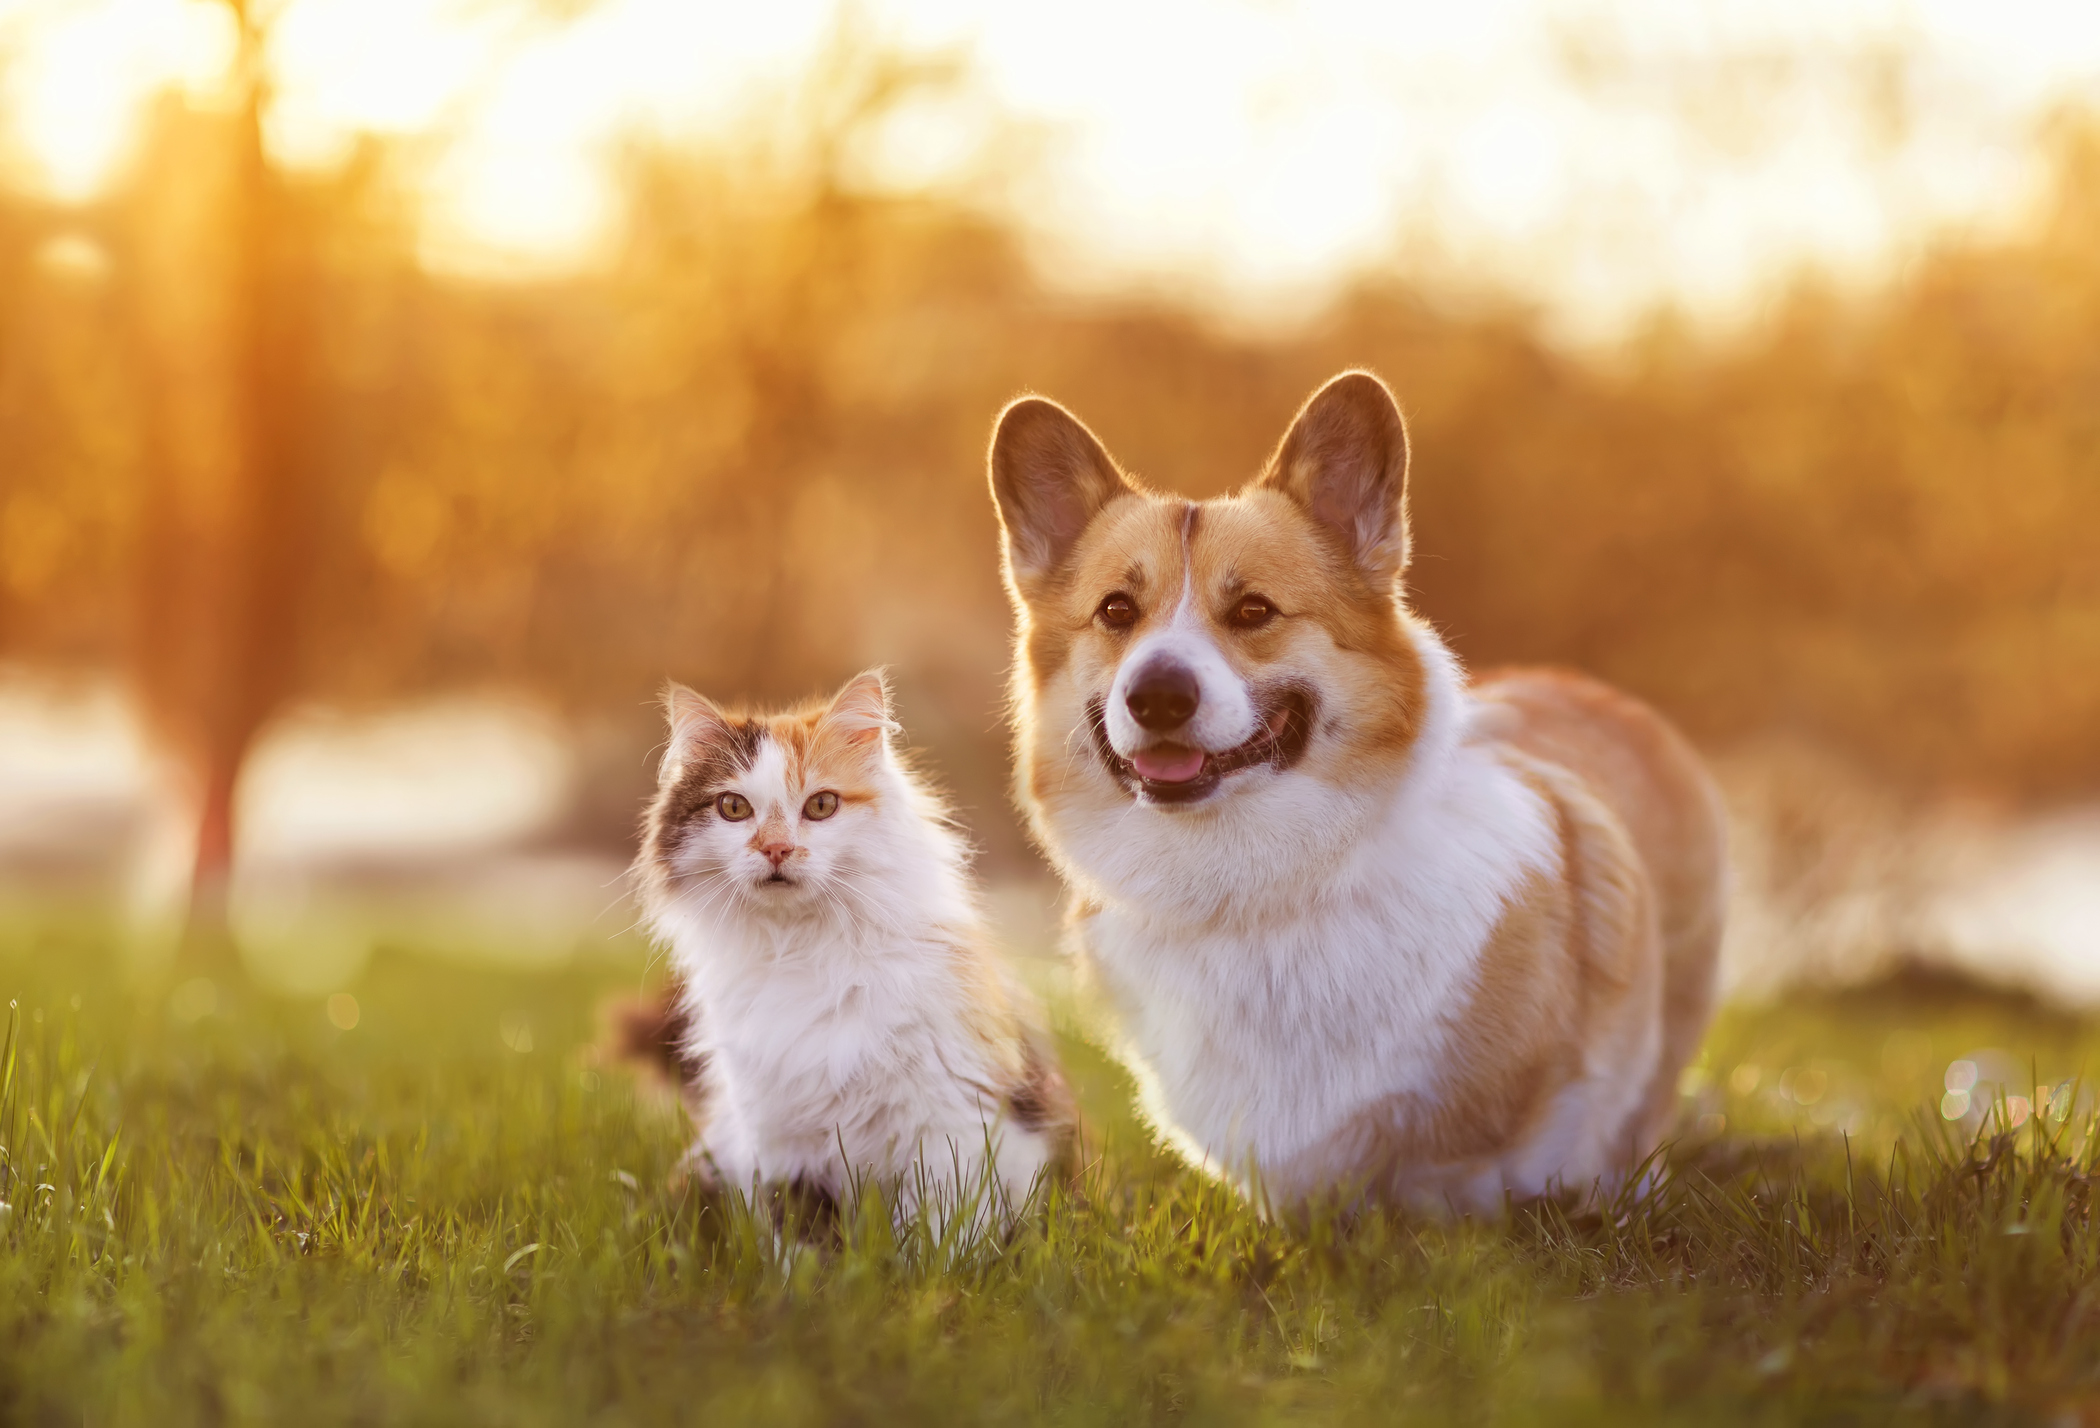 Dog And Cat Backgrounds Hd Cat Dog Download Hd Wallpapers Wallpaper Black  And White  फट शयर